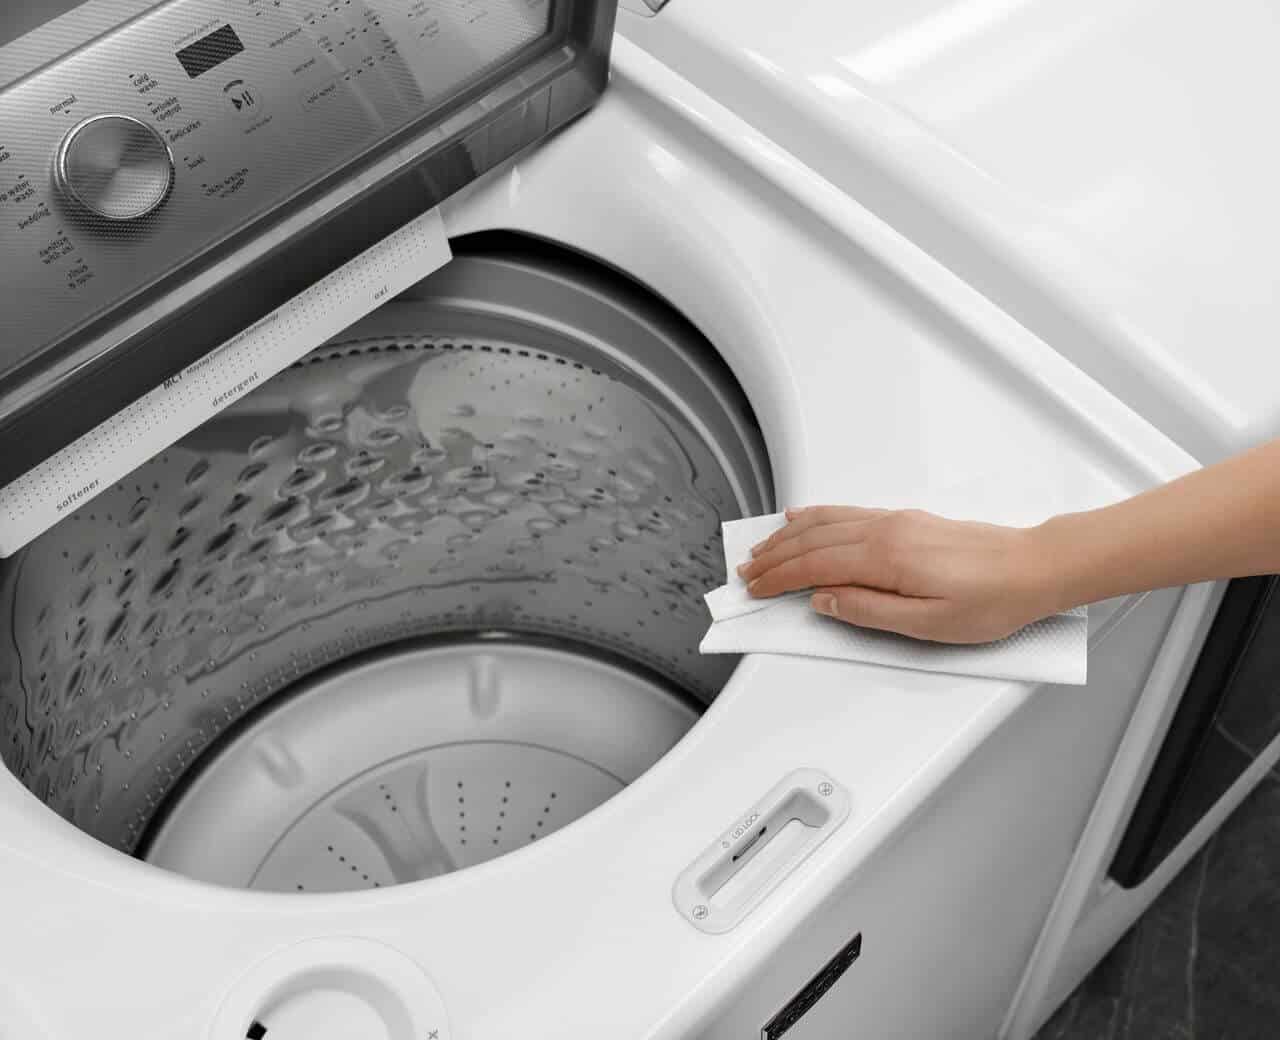 How To Deep Clean A Top Load Washing Machine 1